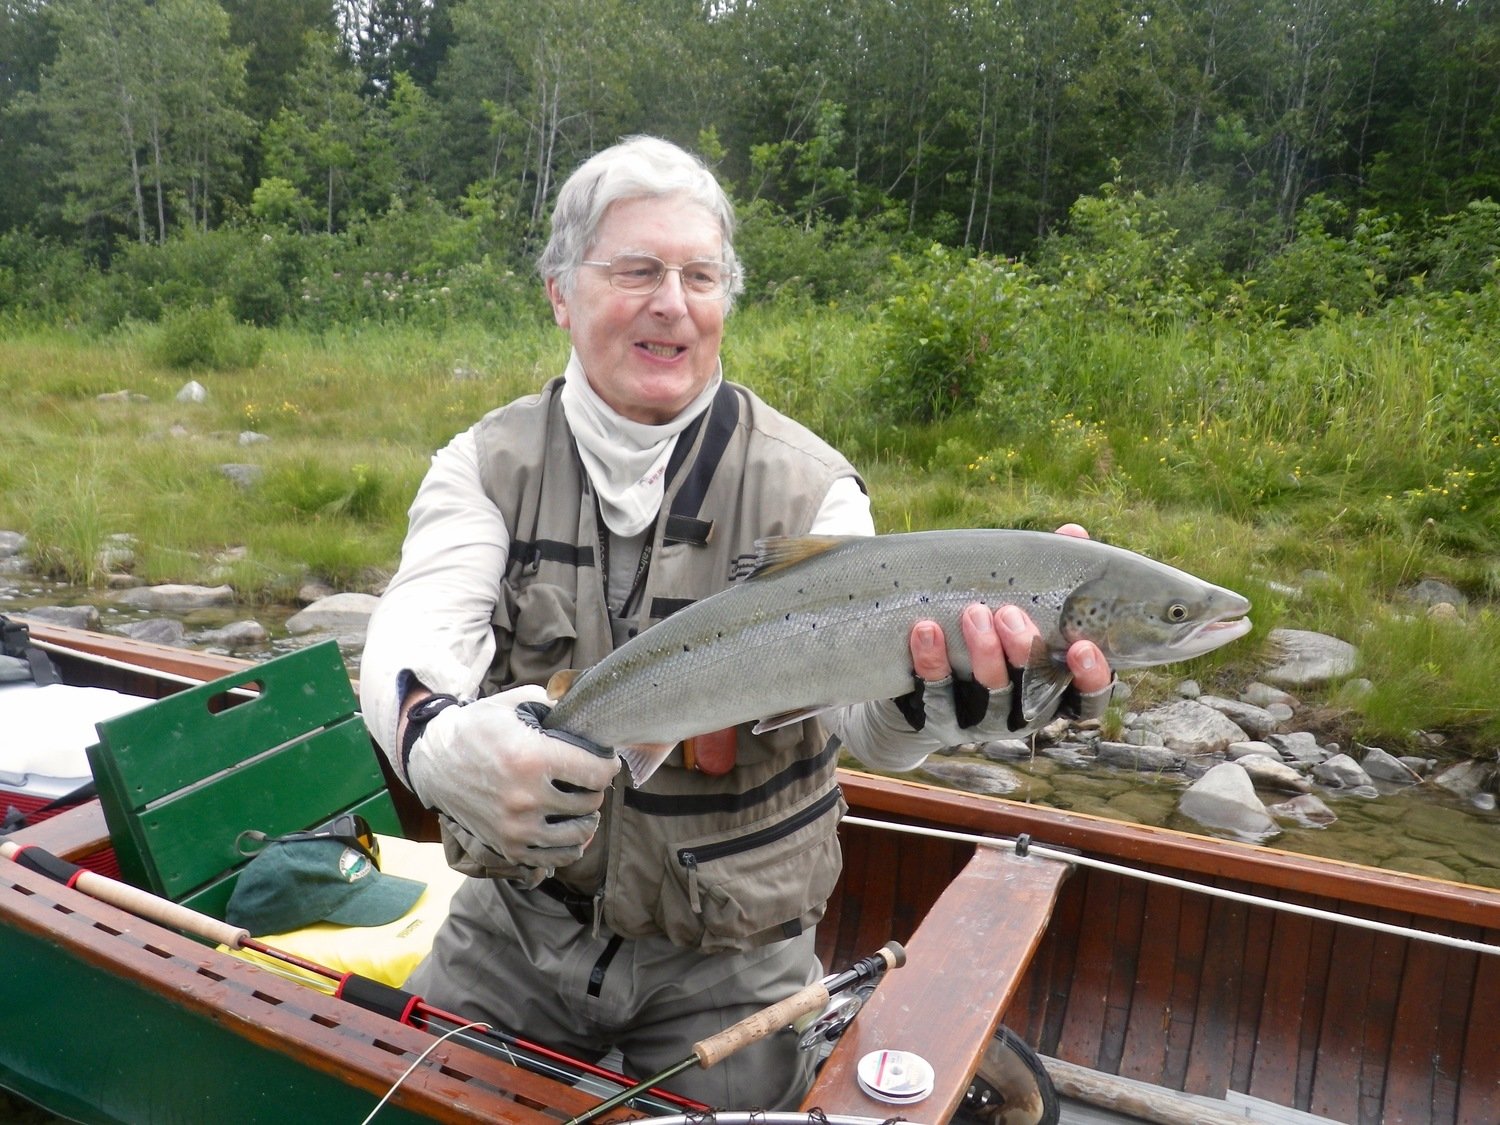 Another happy customer holding up a fresh Atlantic Salmon